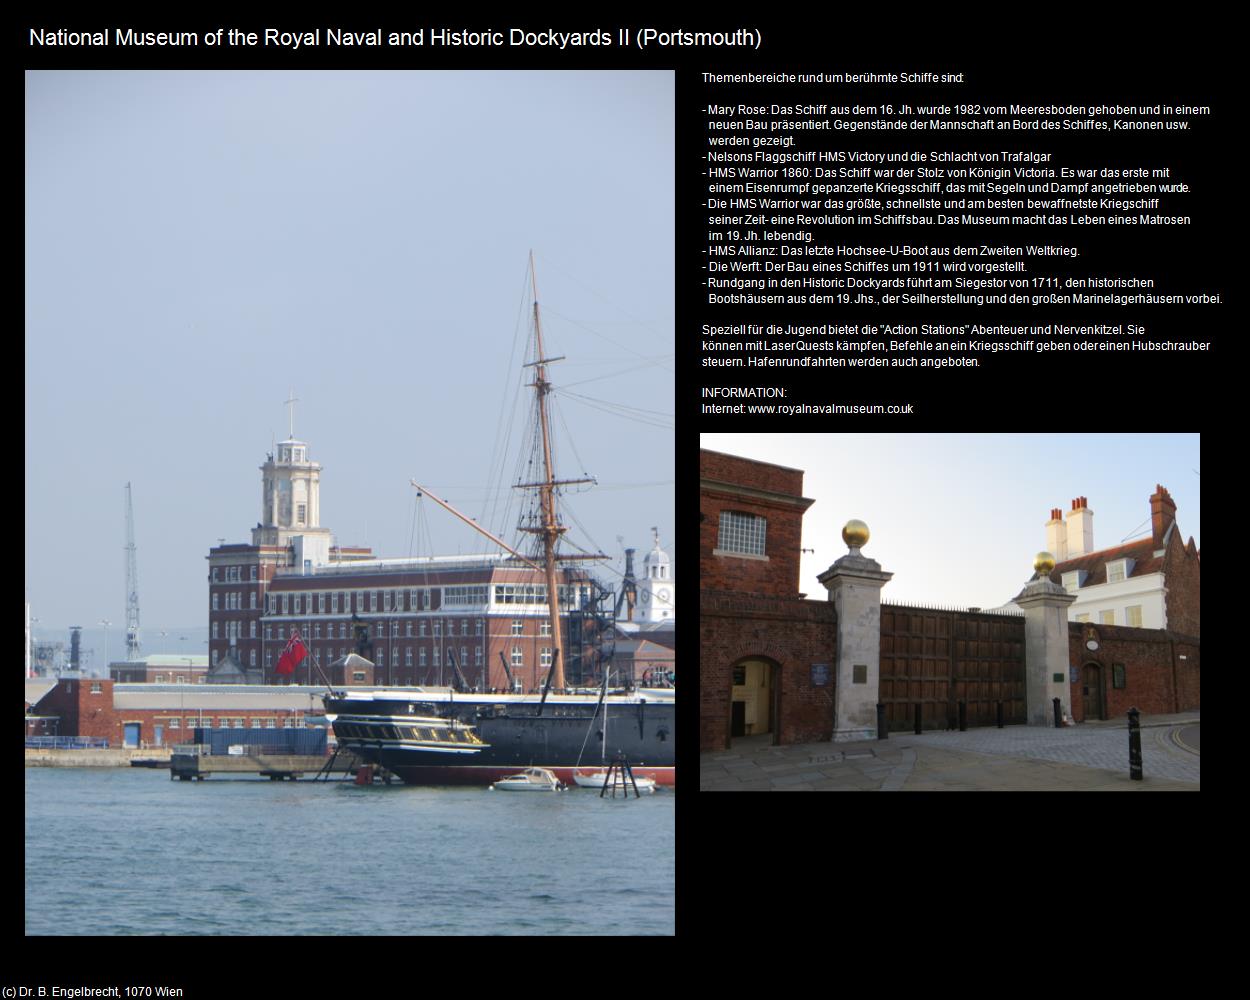 National Museum of the Royal Naval and Historic Dockyards II (Portsmouth, England) in Kulturatlas-ENGLAND und WALES